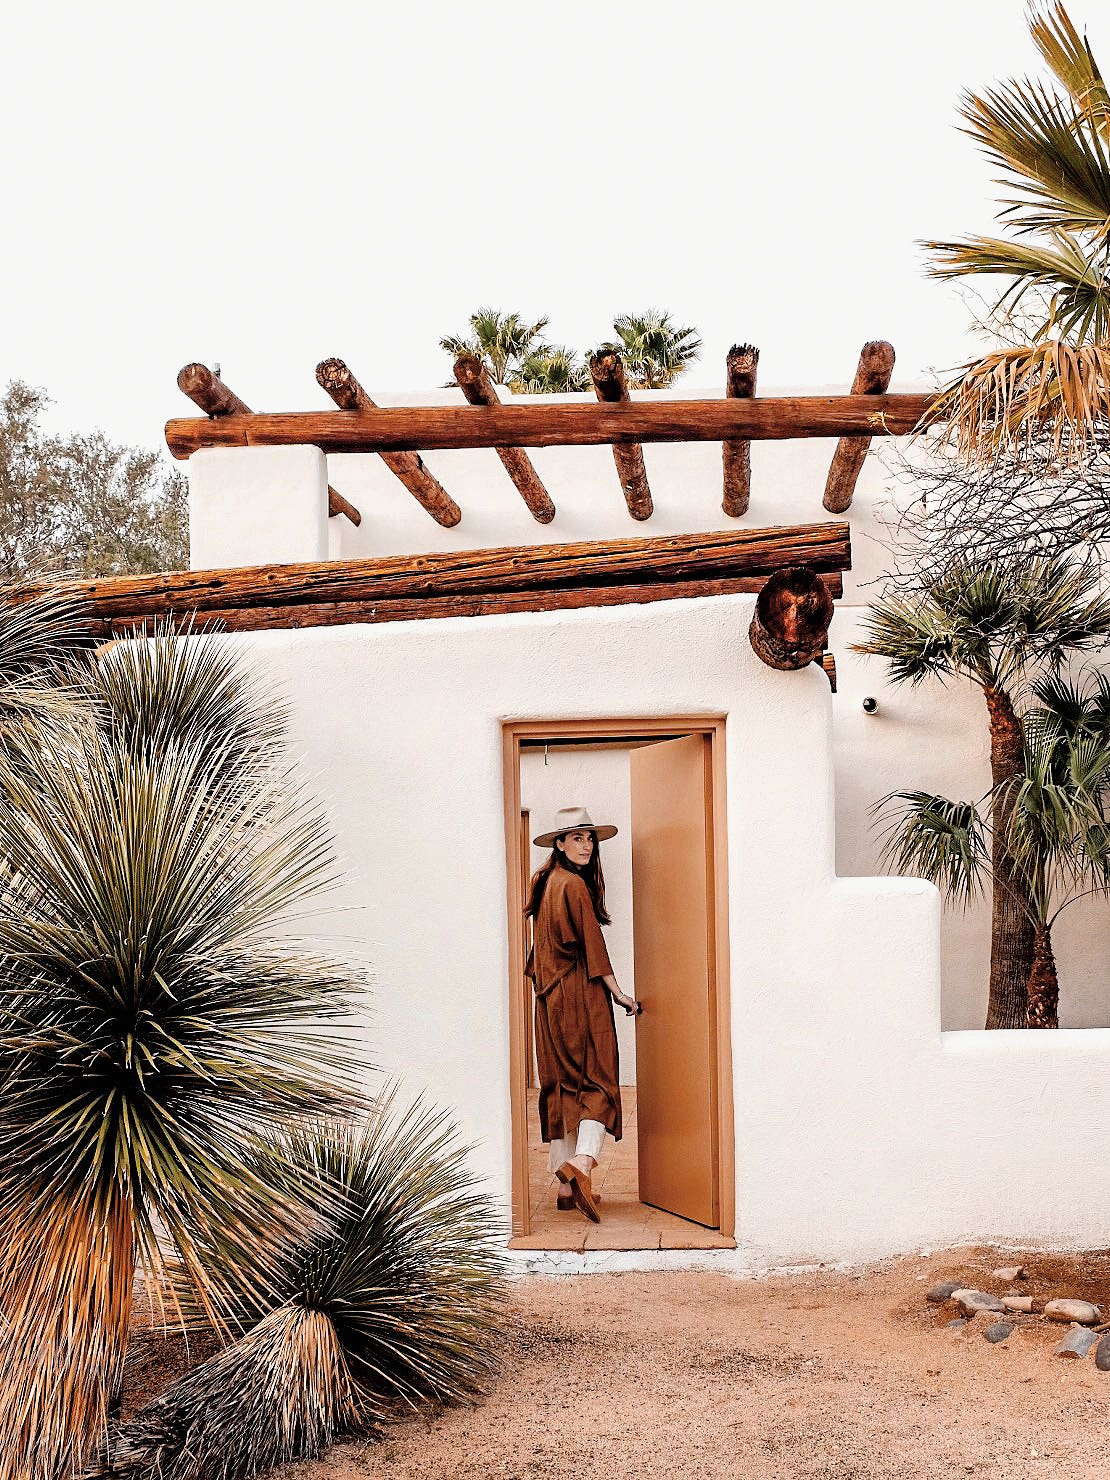 This Free-Spirited Arizona City Is Where All the Cool Creatives Live